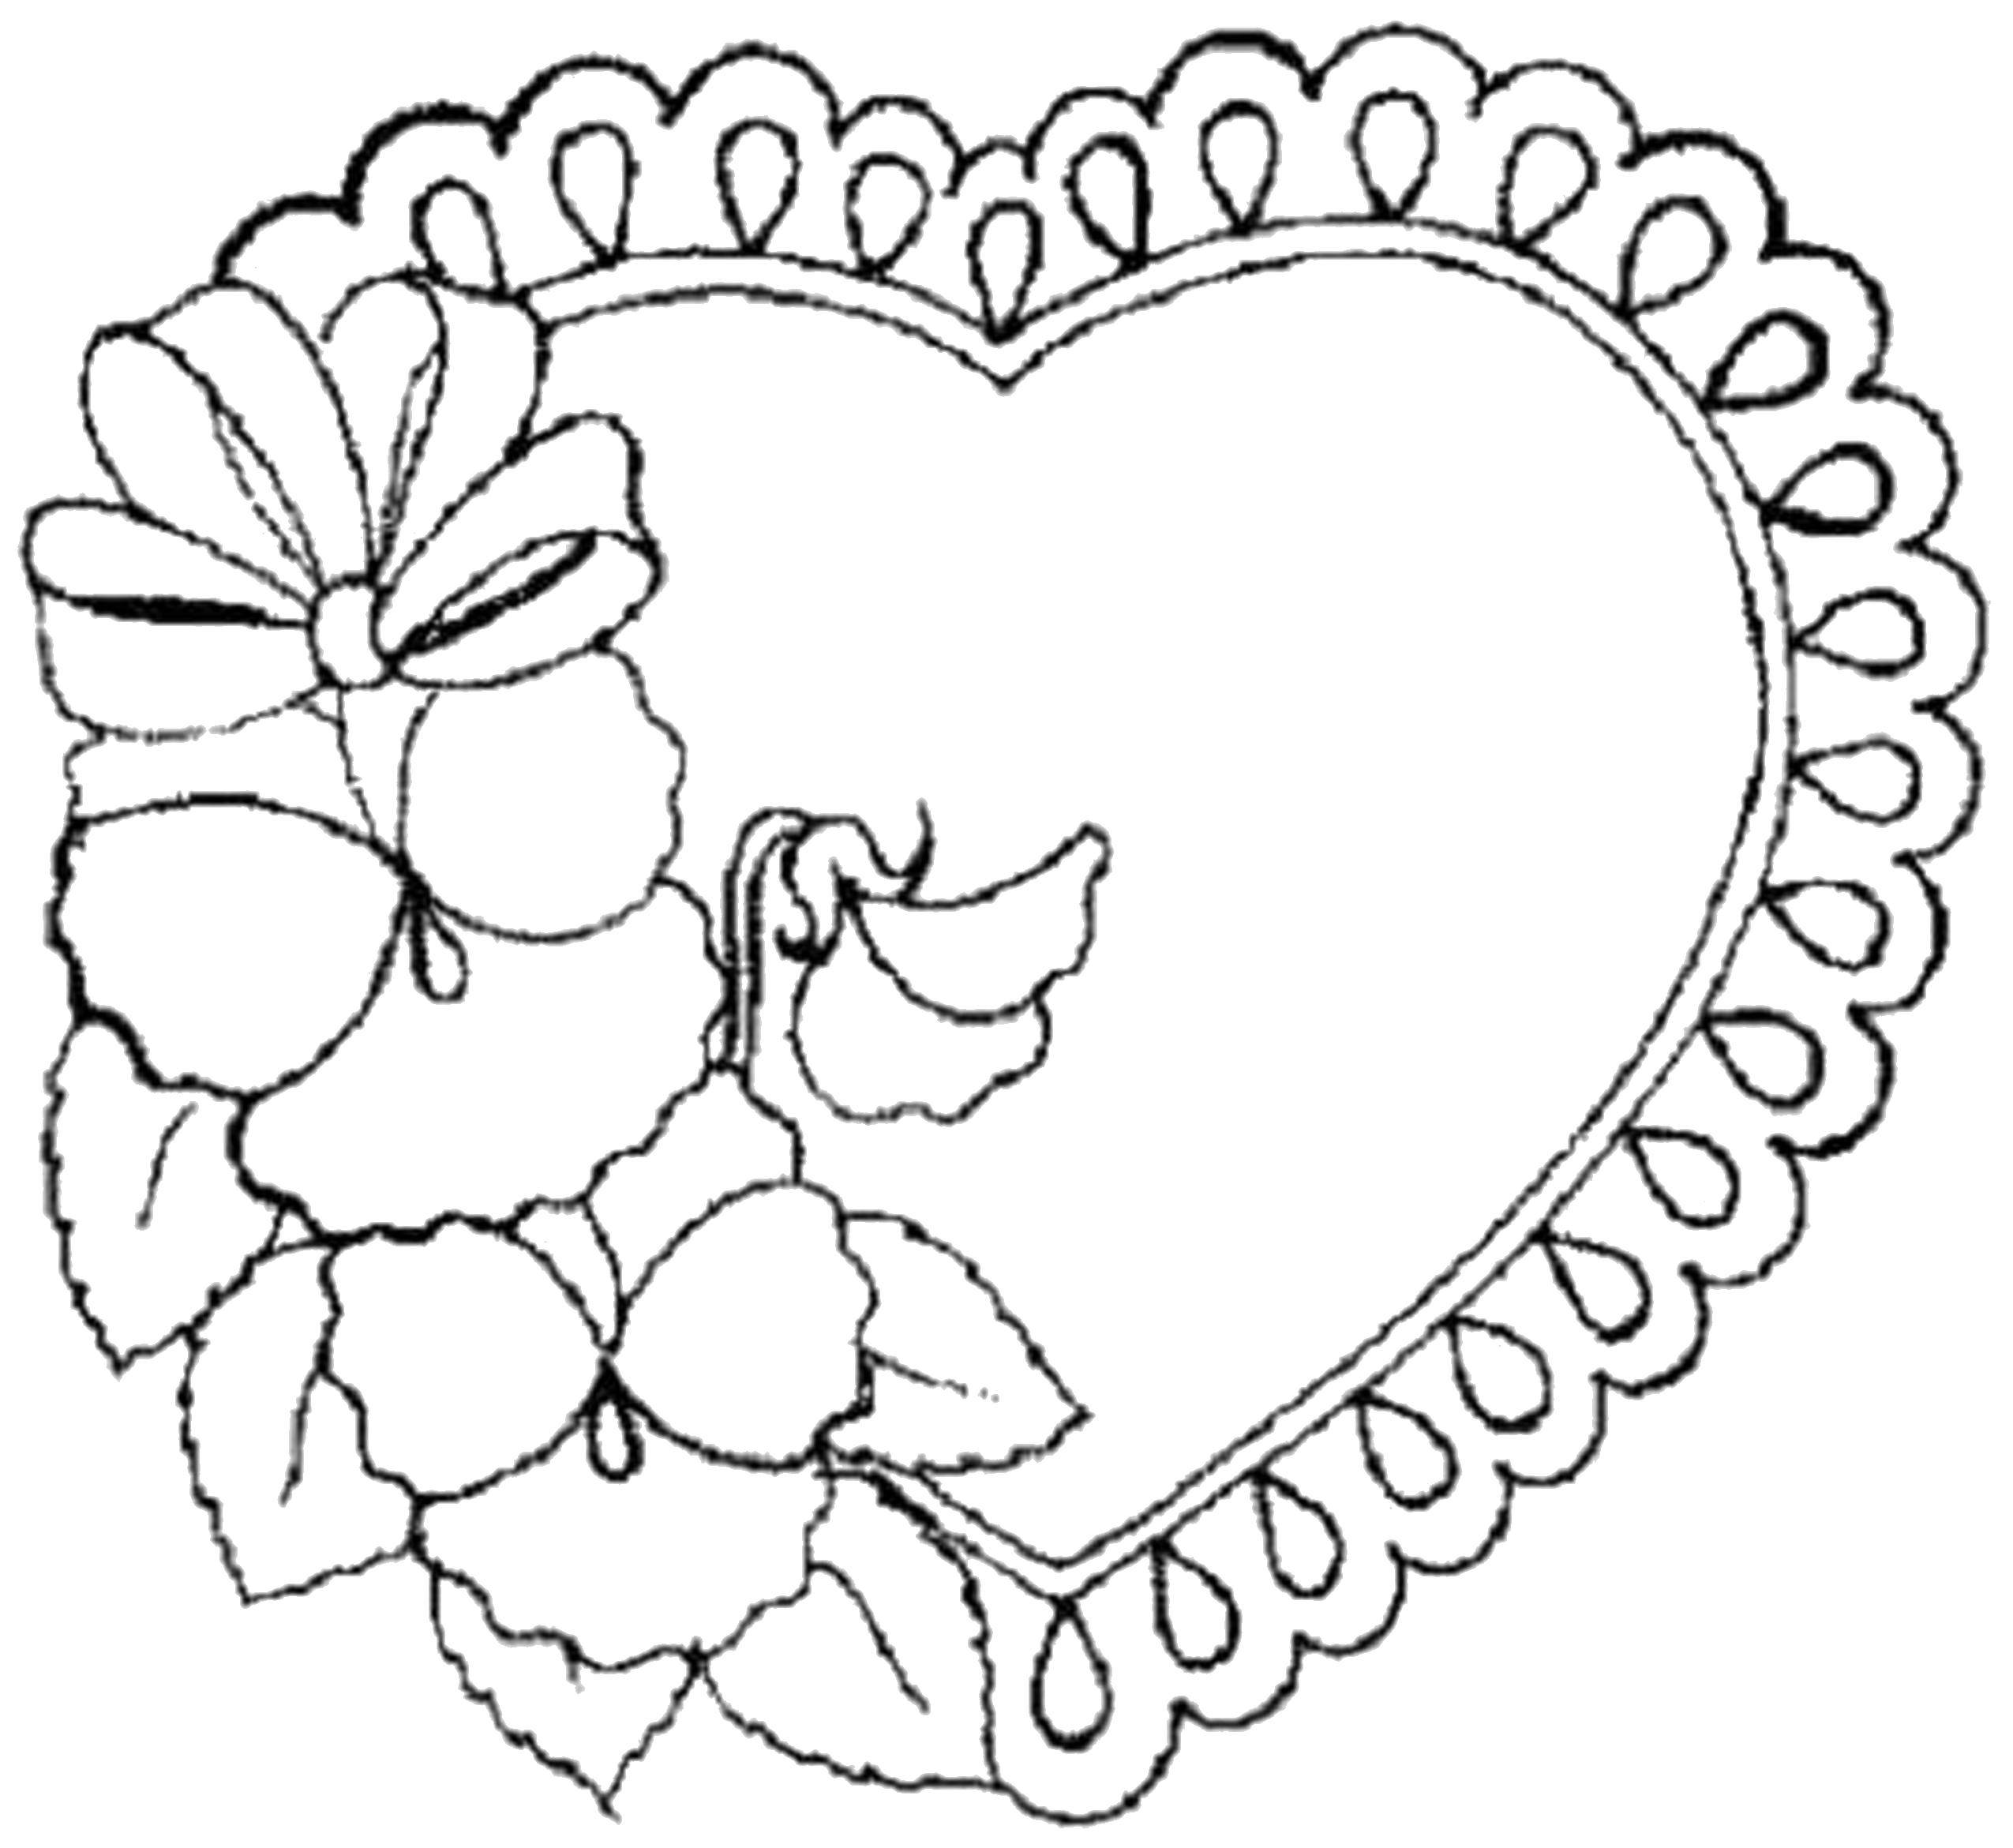 Coloring Lace heart with flowers. Category For girls. Tags:  Heart, love, rose.